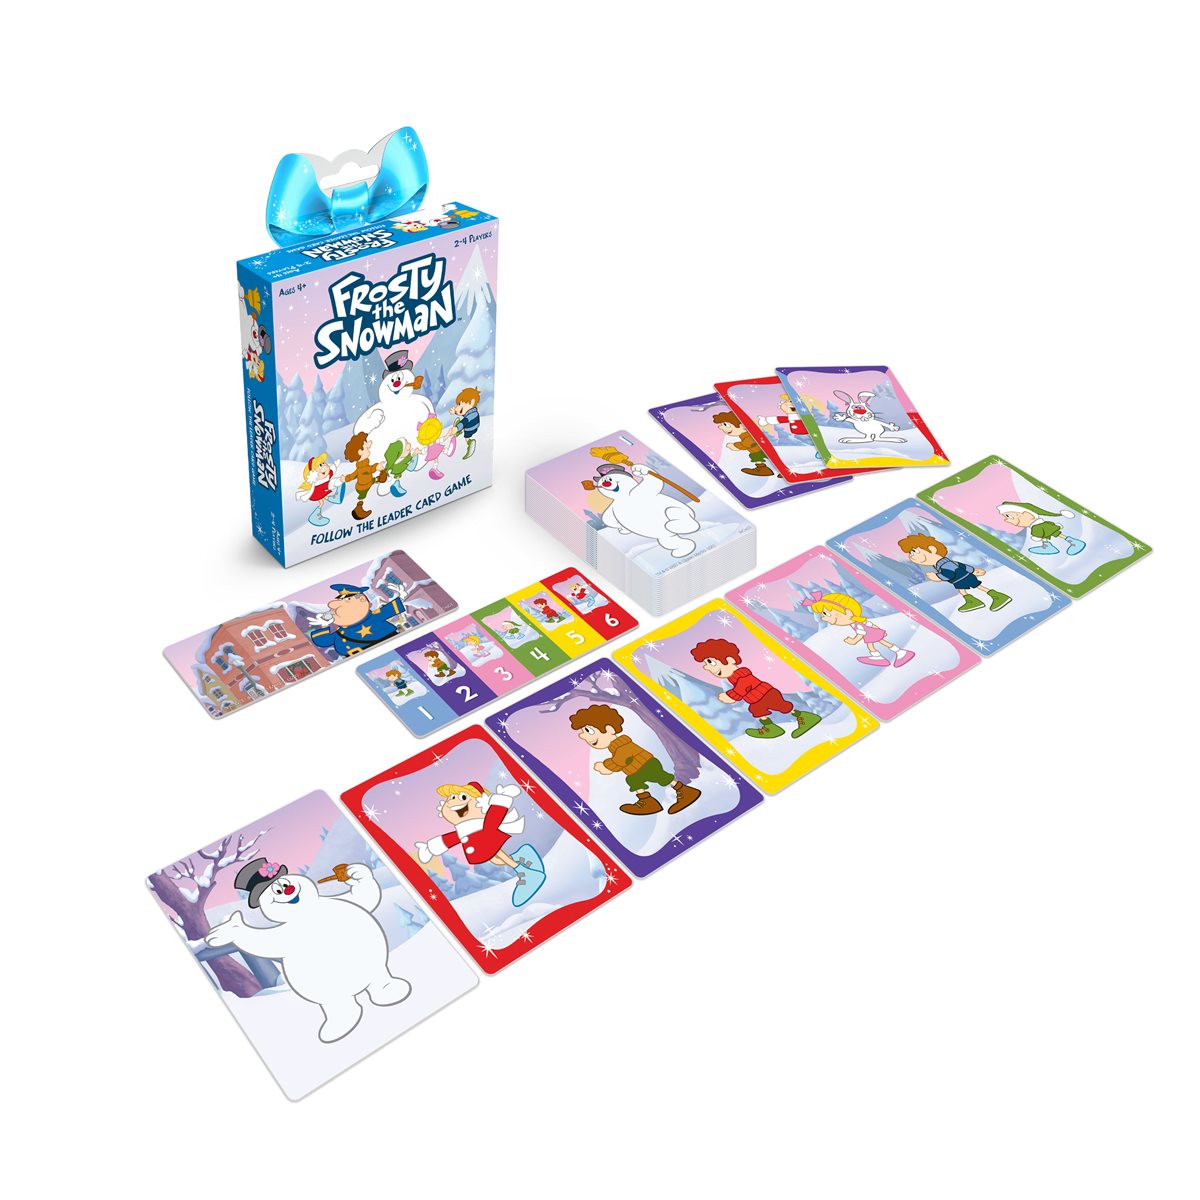 Frosty the Snowman - Follow the Leader Card Game